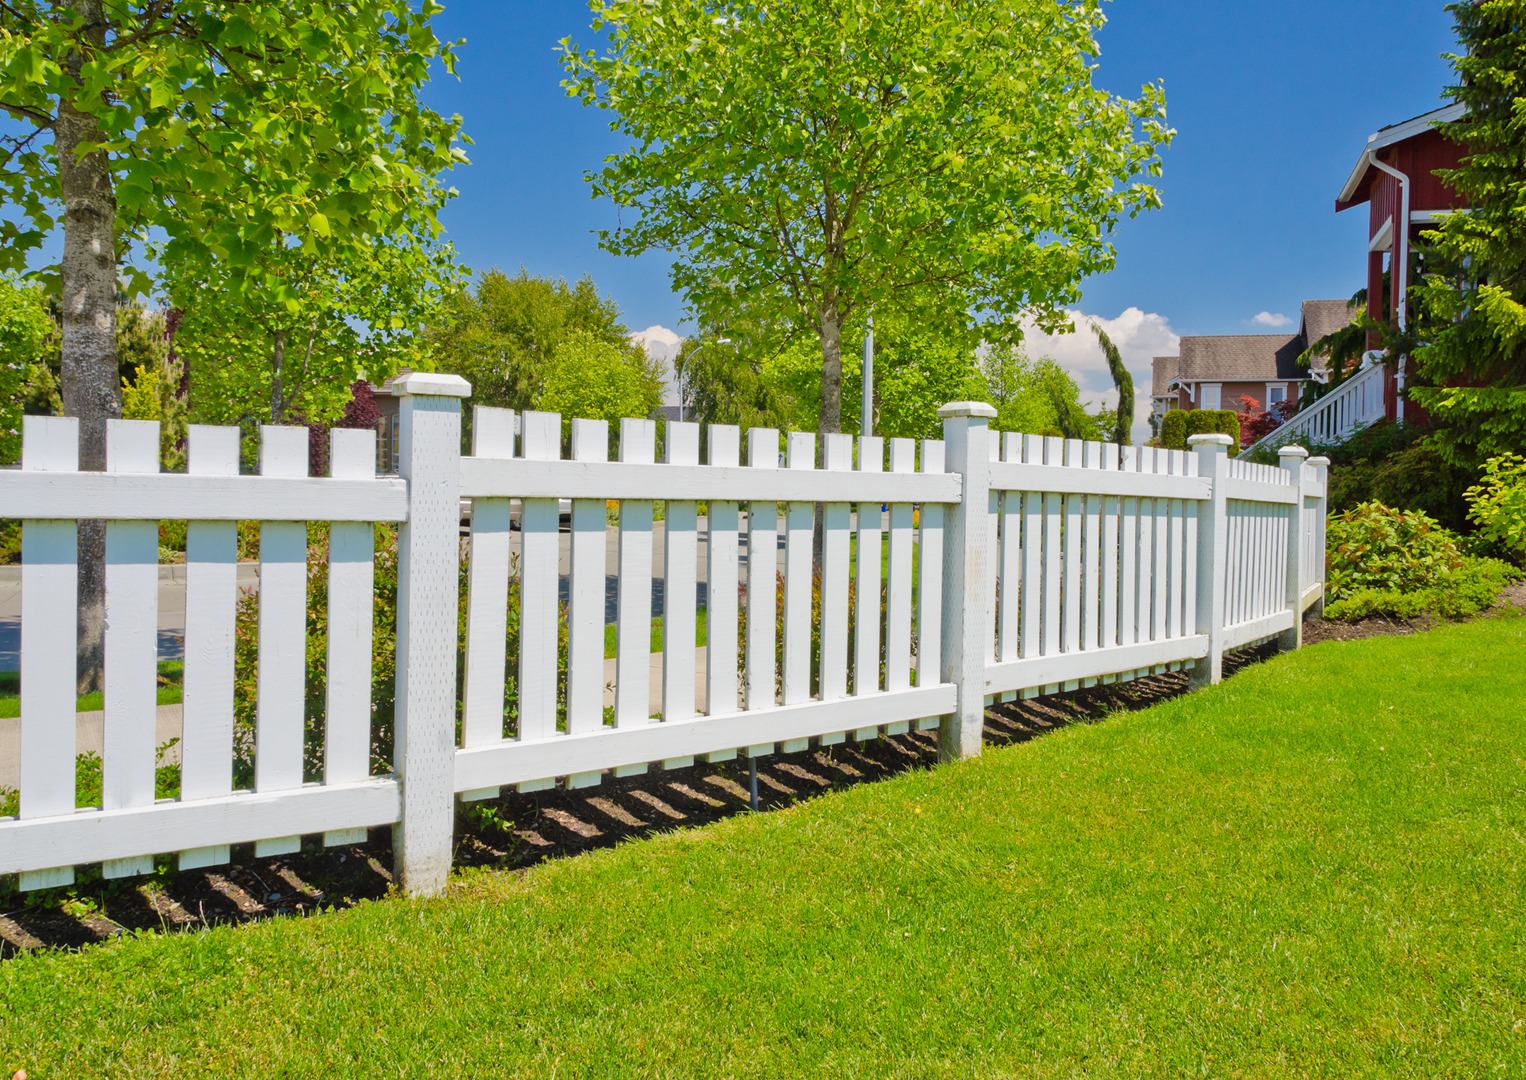 A new fence can add instant street appeal